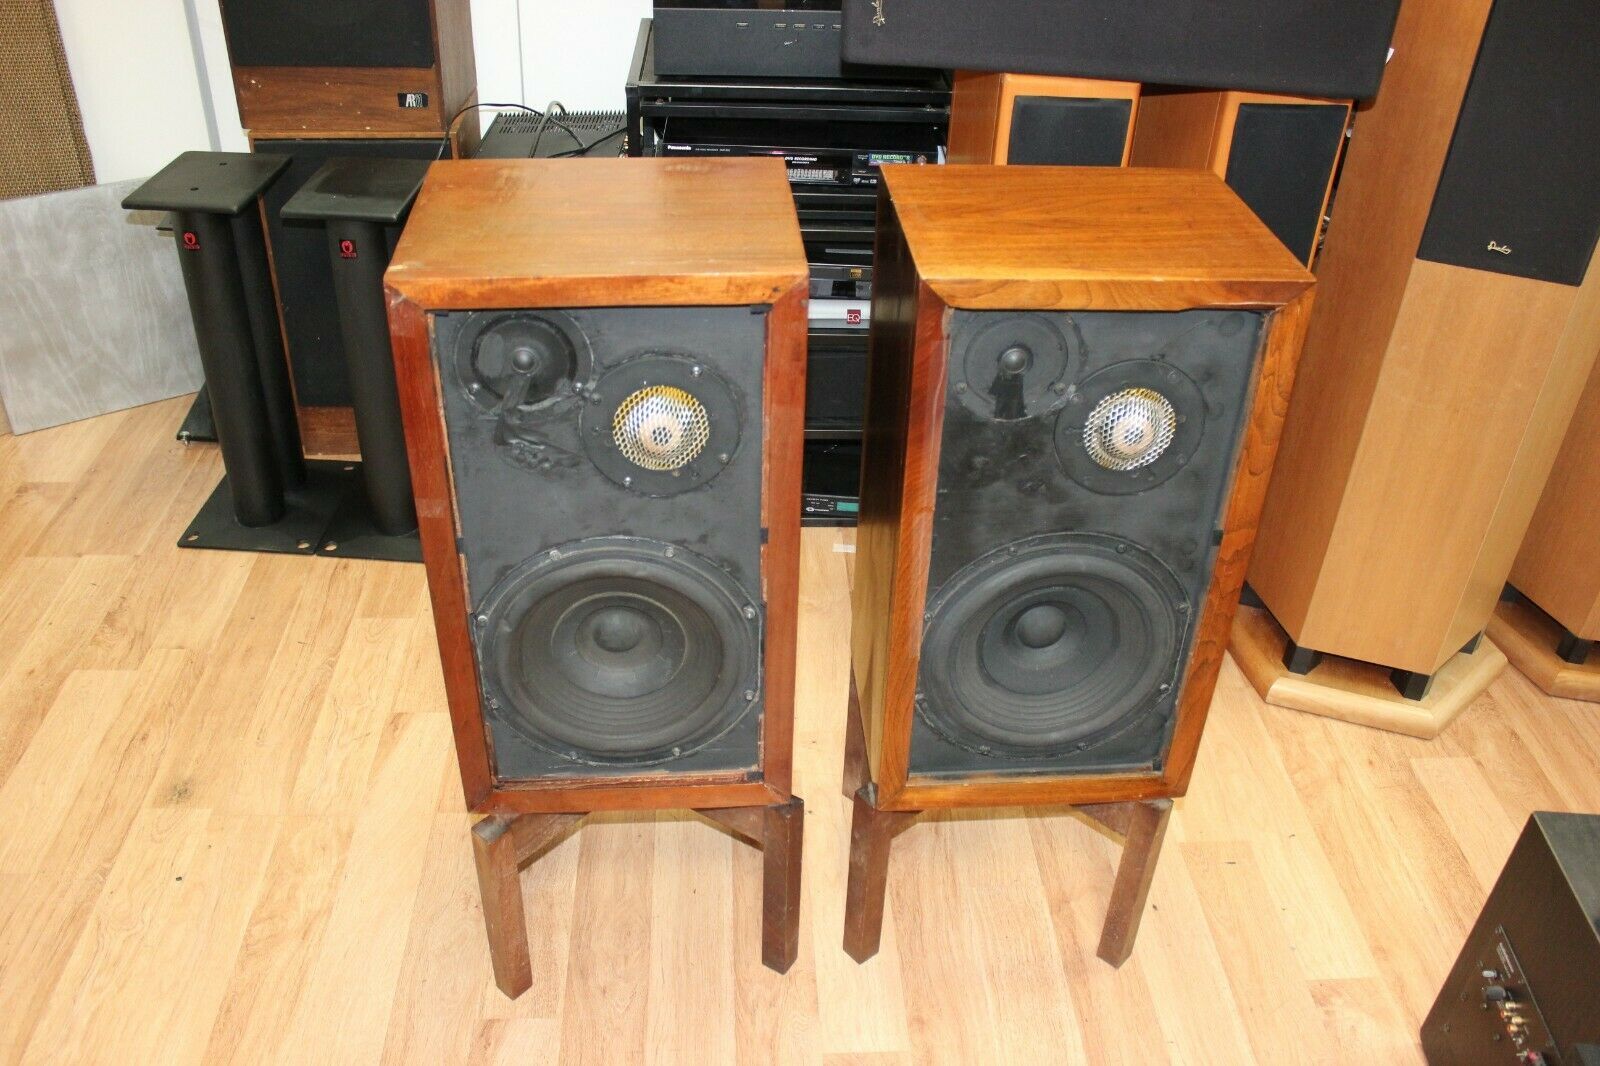 mua loa cũ, Acoustic Research AR3 Speakers - Sounds GREAT